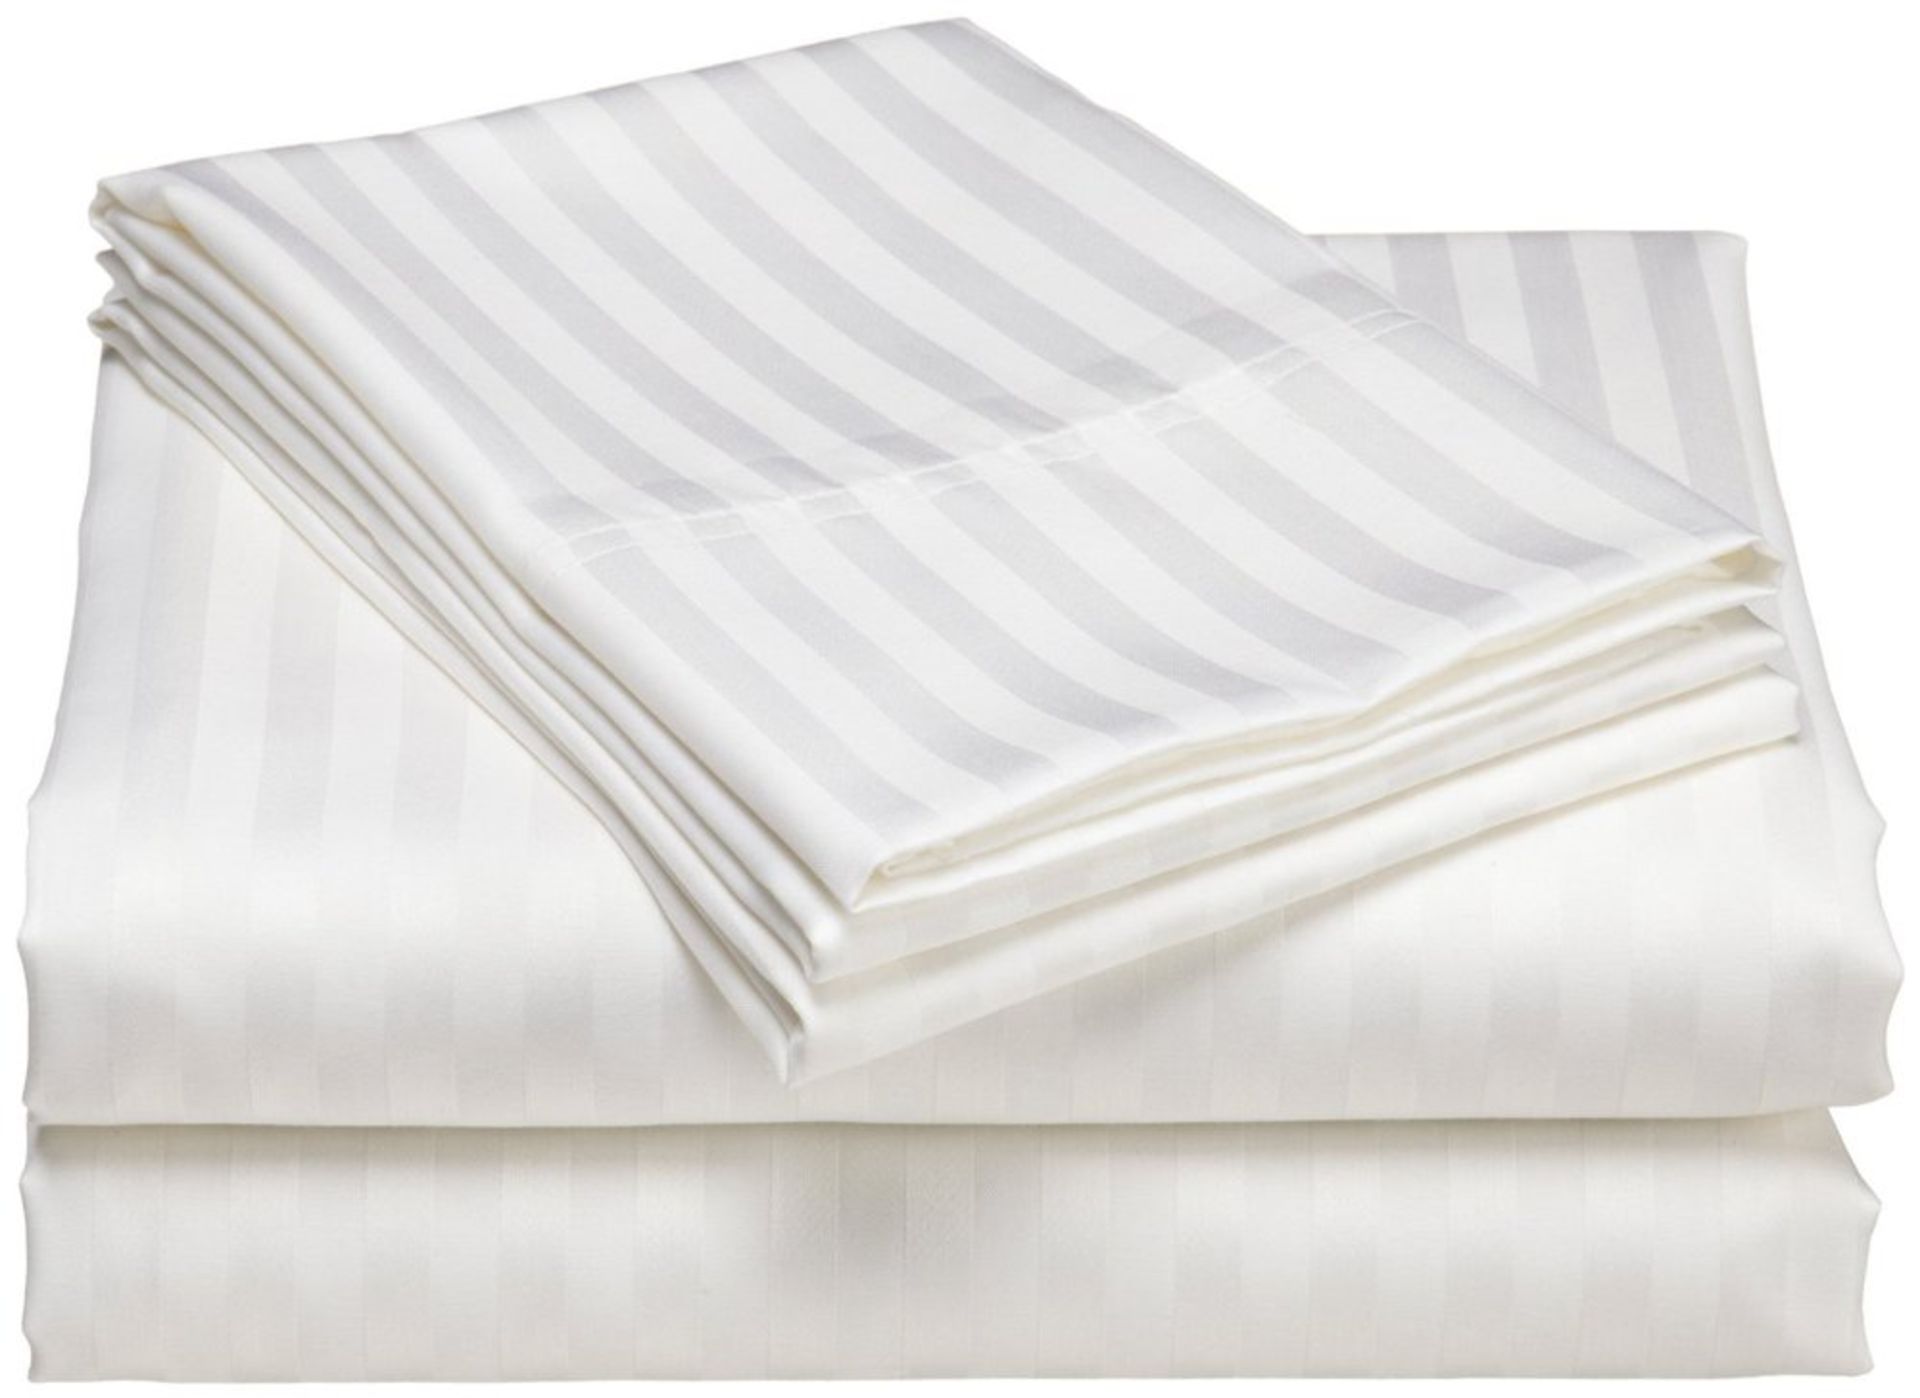 V Brand New 100% Egyptian Cotton Double Size Fitted Sheet RRP £25.50 X 2 YOUR BID PRICE TO BE